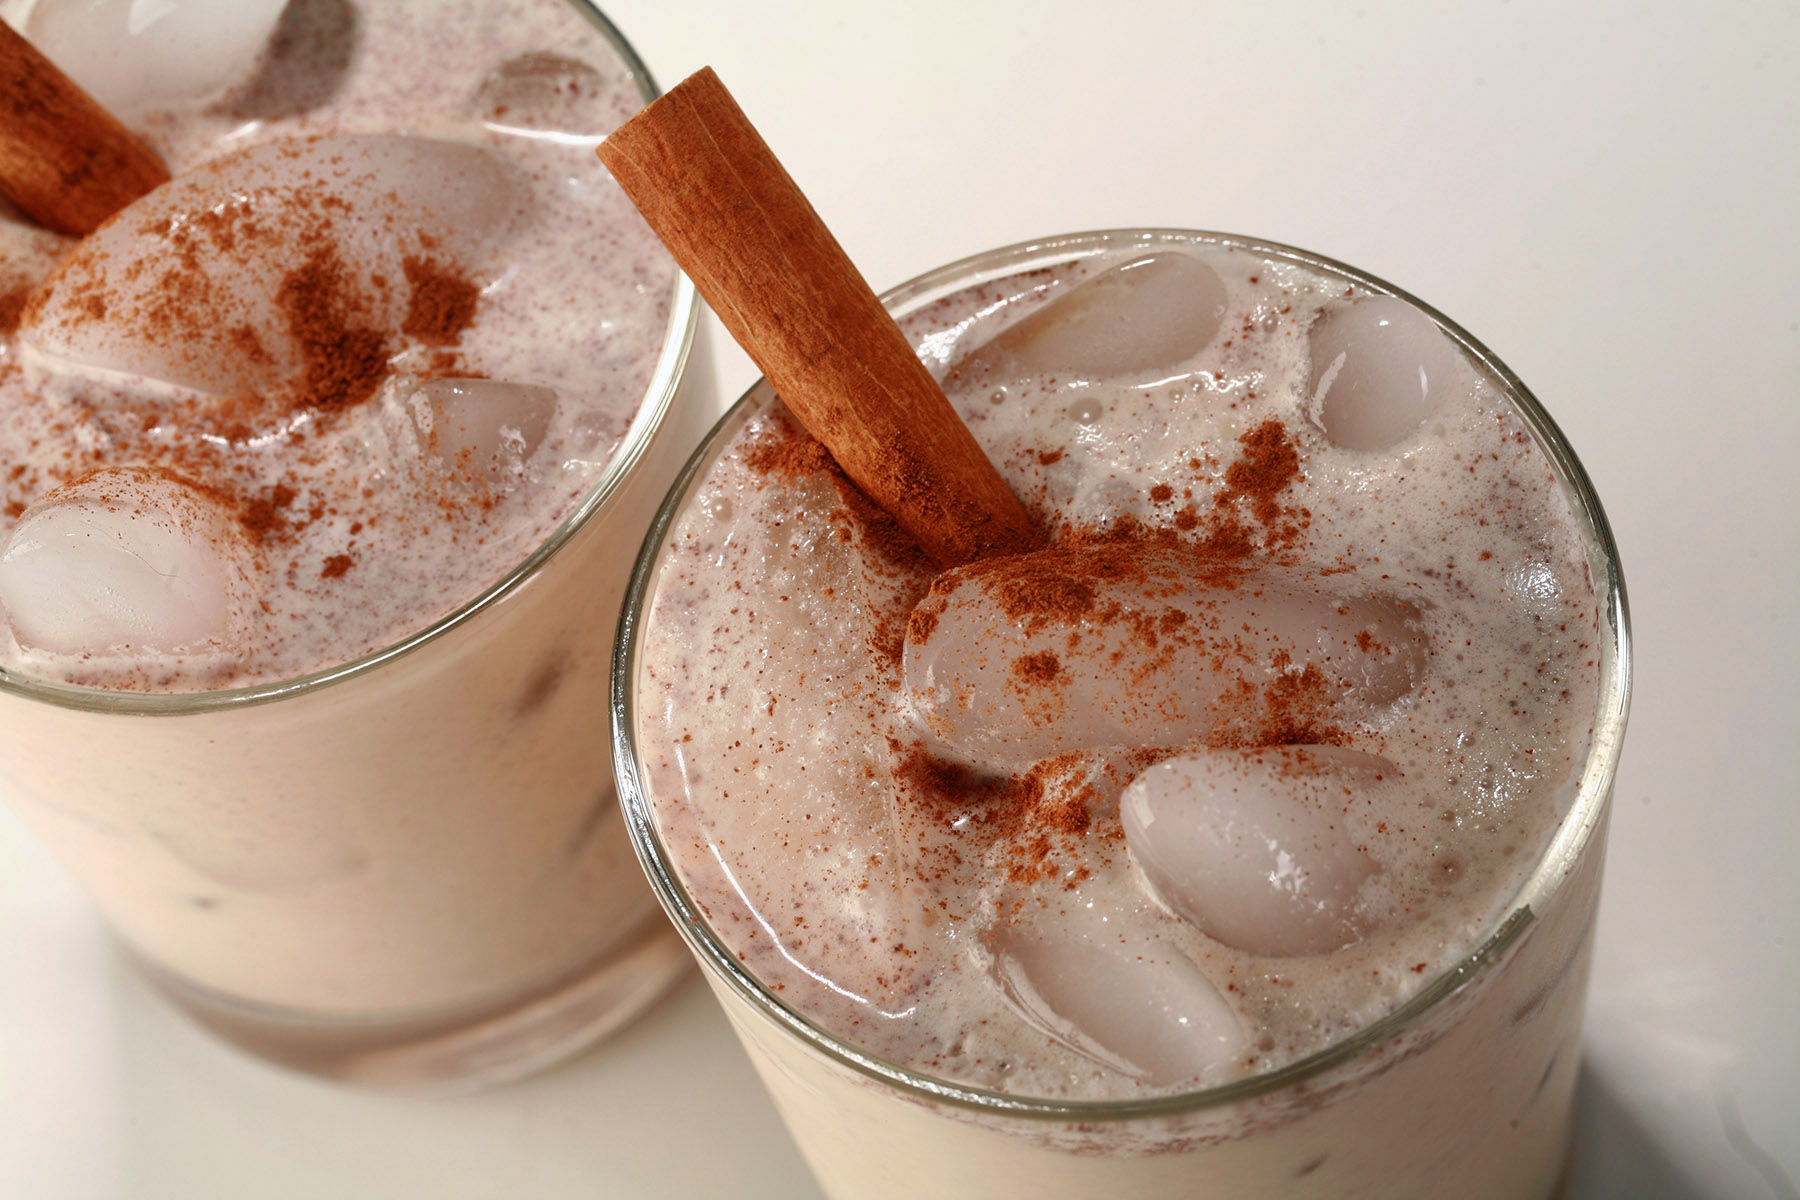 2 glasses of keto rumchata, garnished with a sinnamon stick and sprinkle of cinnamon.